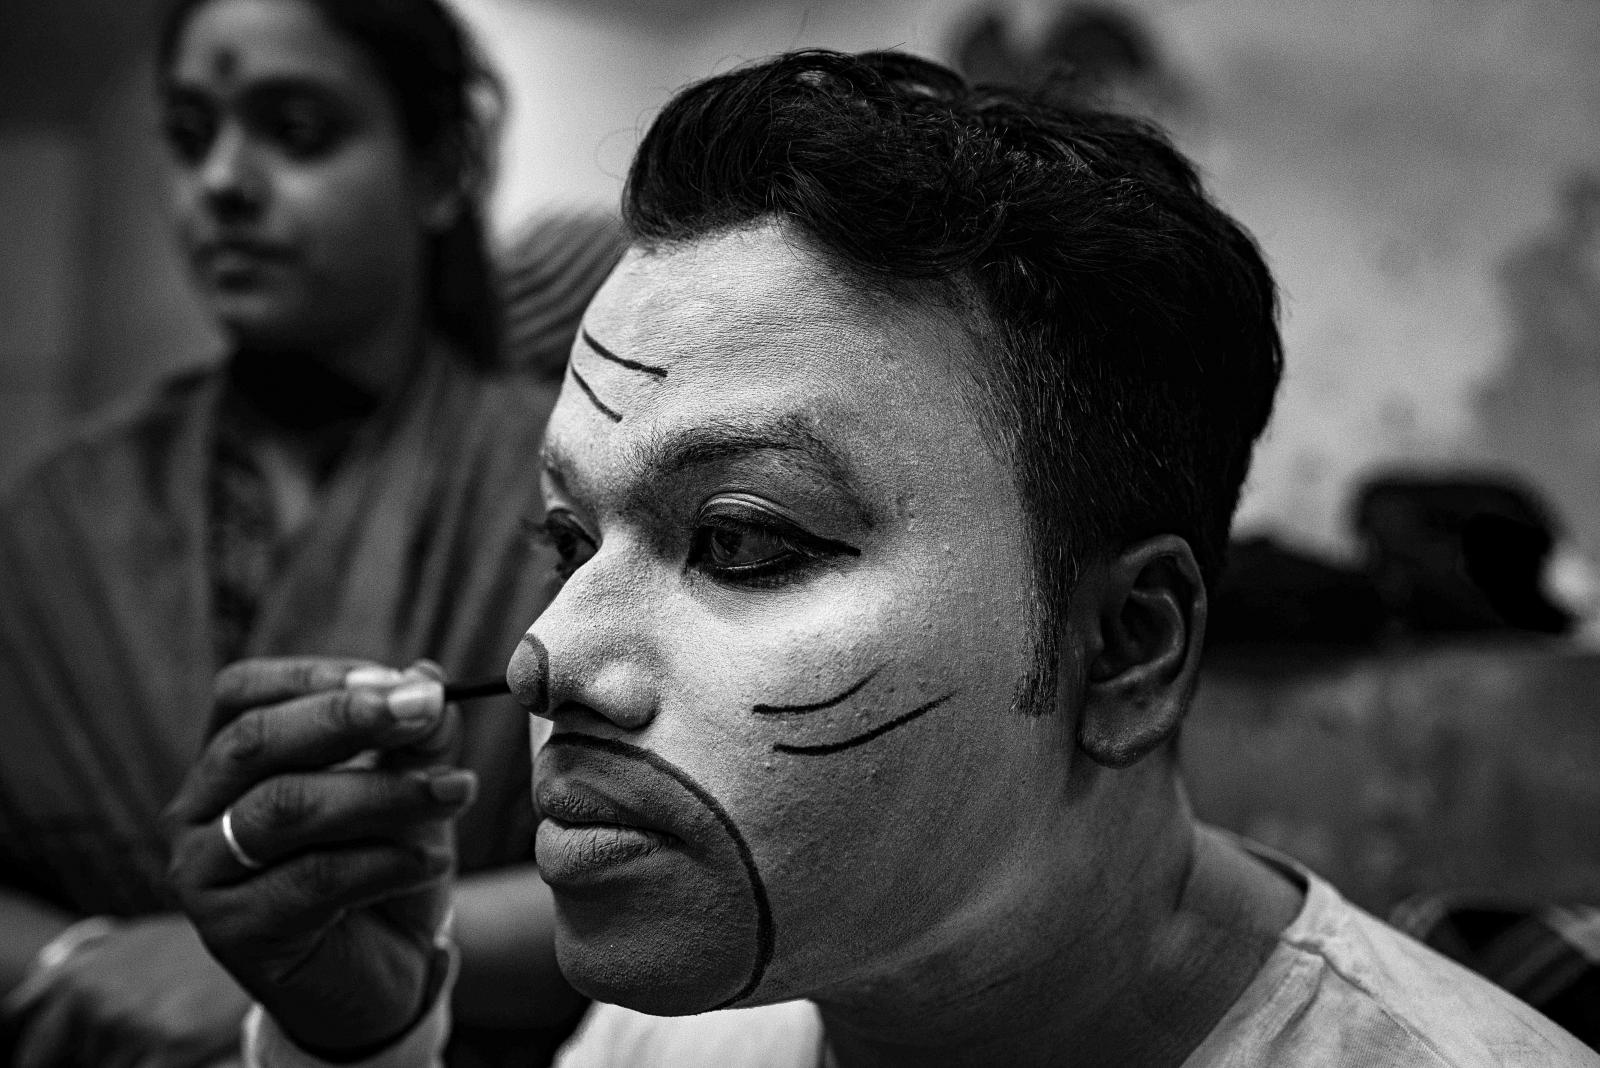 A performer taking makeup as per his role in the drama.